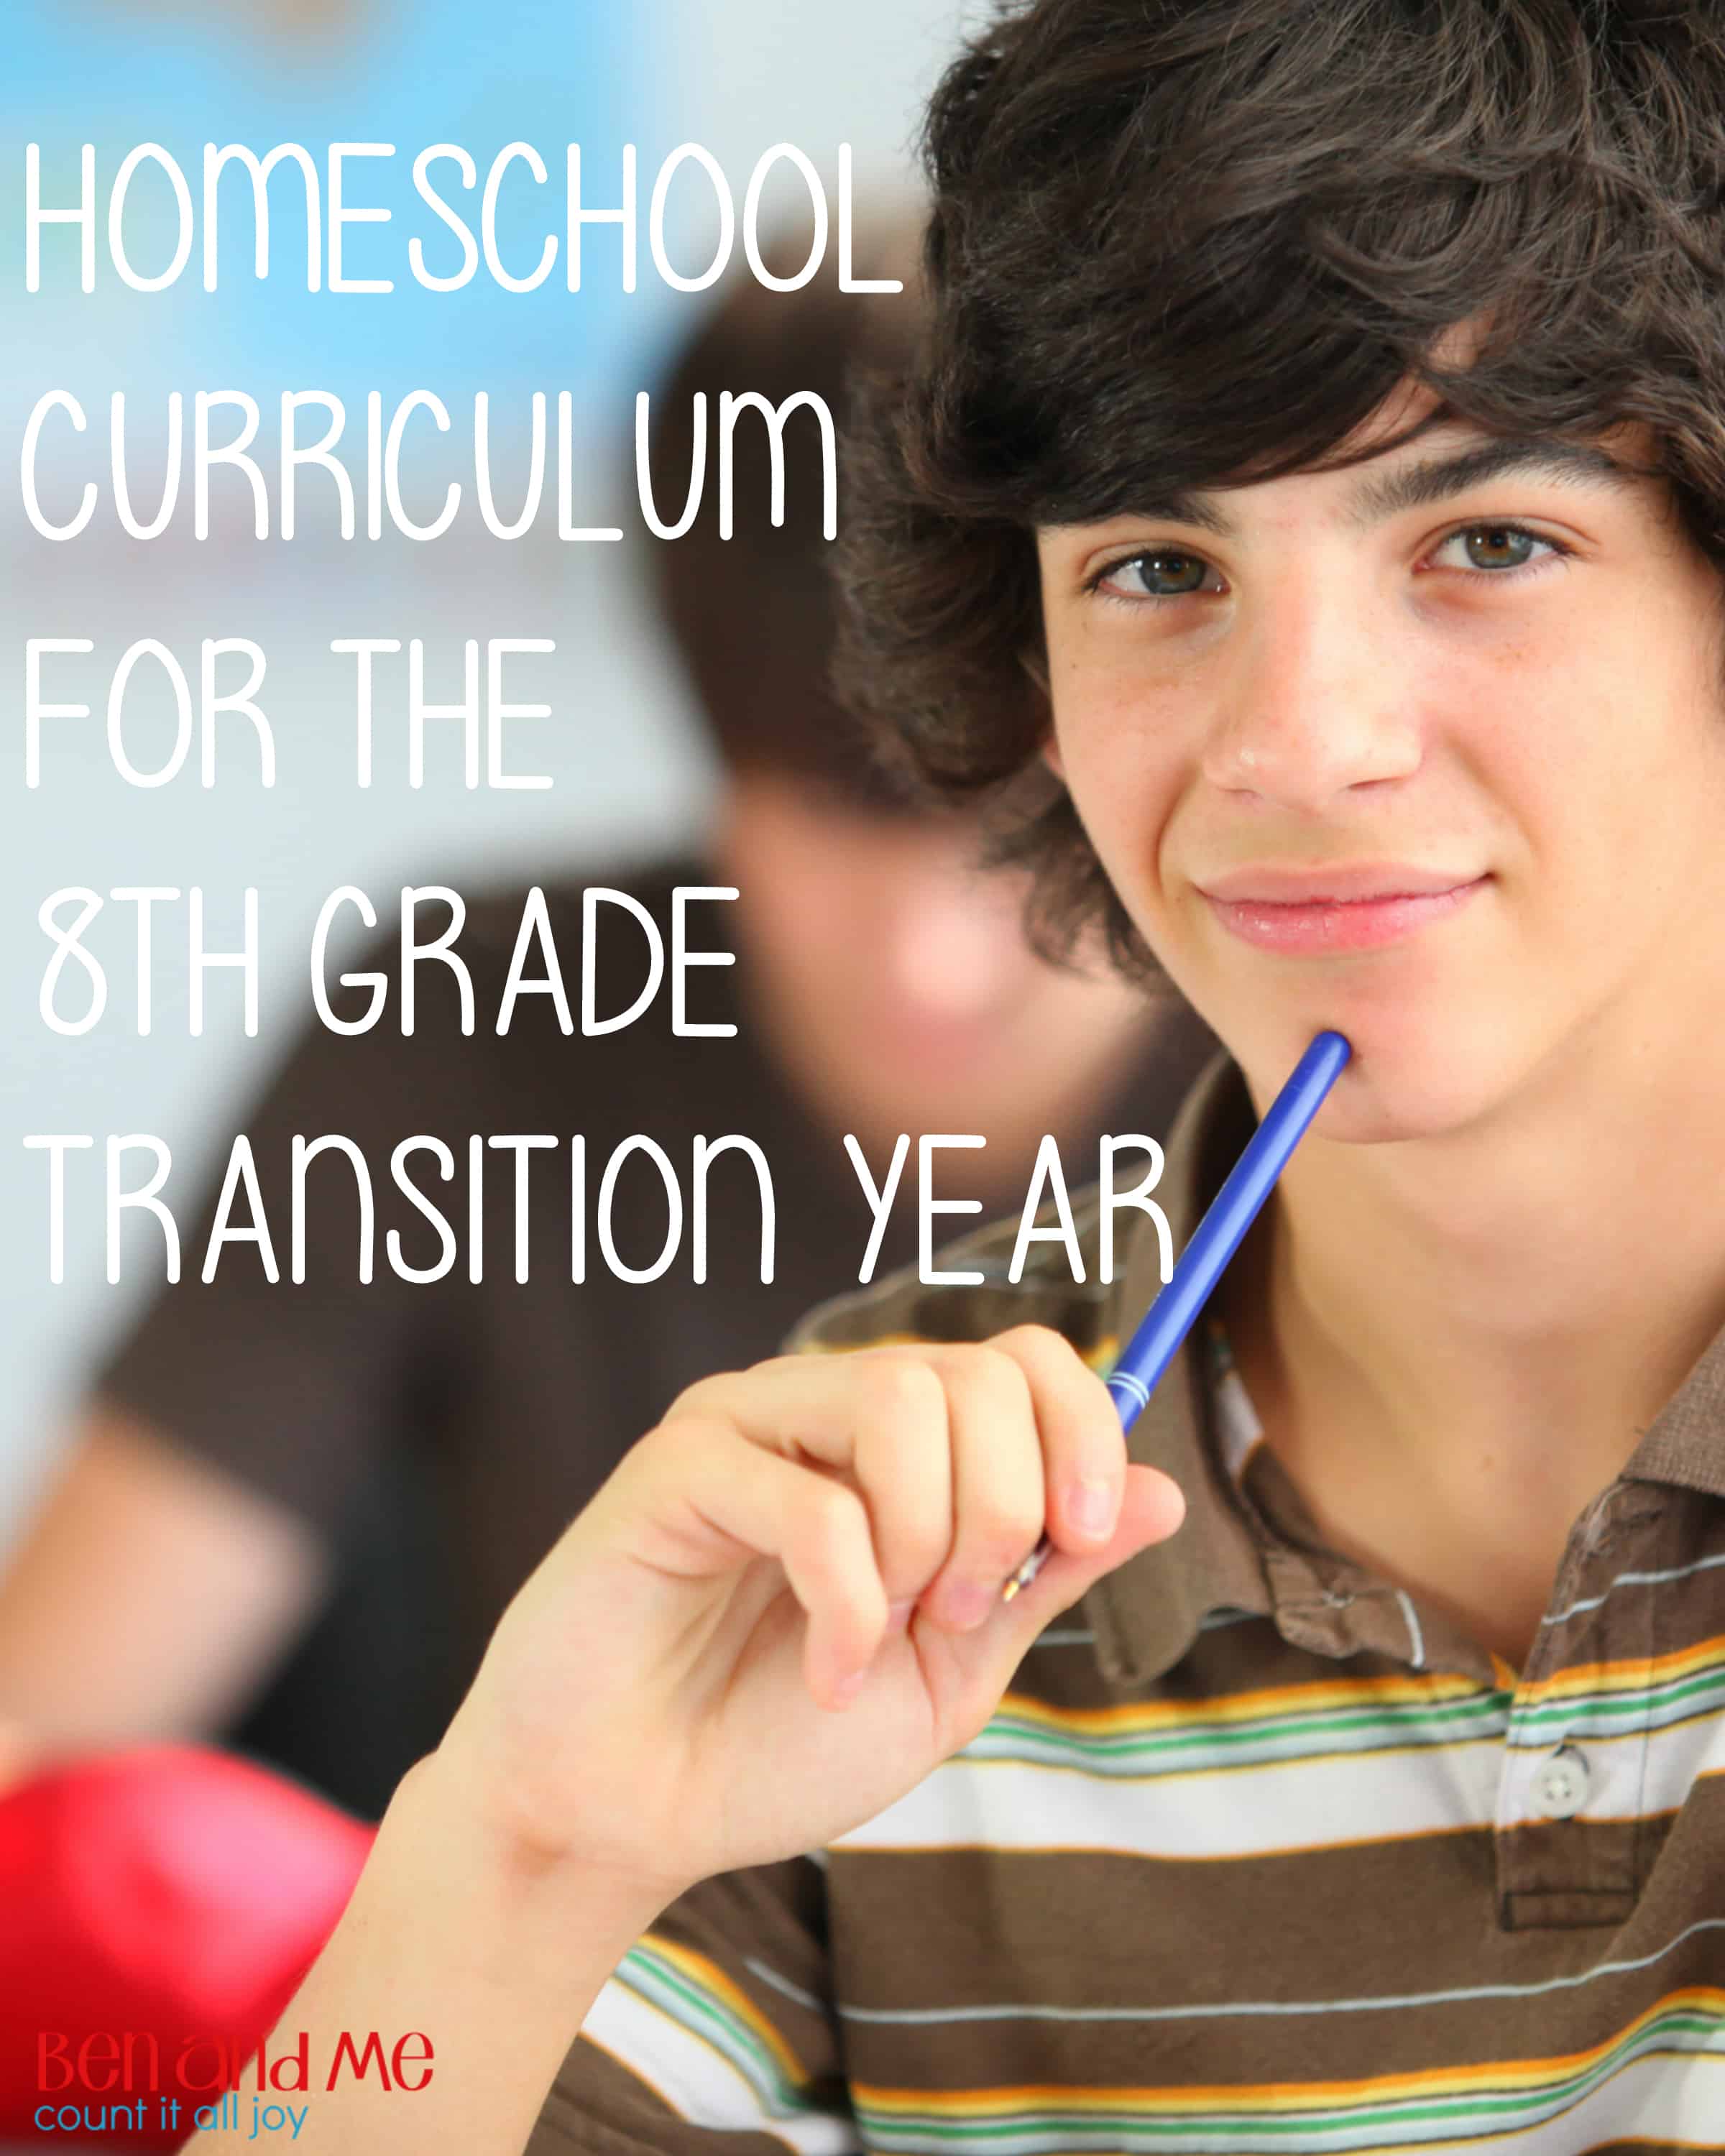 Homeschool Curriculum for the 8th Grade Transition Year